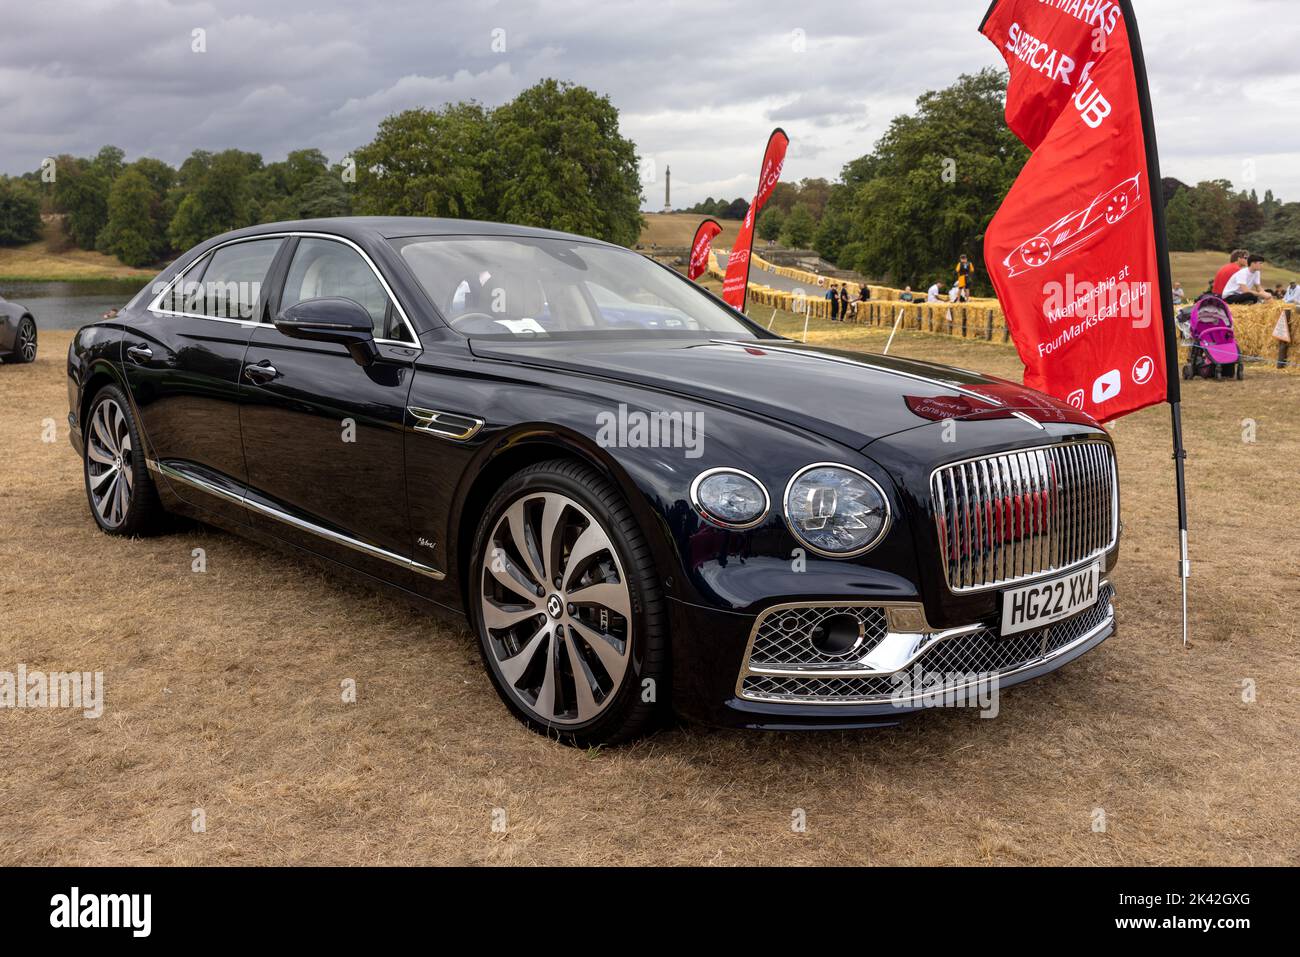 Bentley Flying Spur Hybrid ‘HG22 XXA’ on display at the Salon Privé Concours d’Elégance motor show held at Blenheim Palace Stock Photo